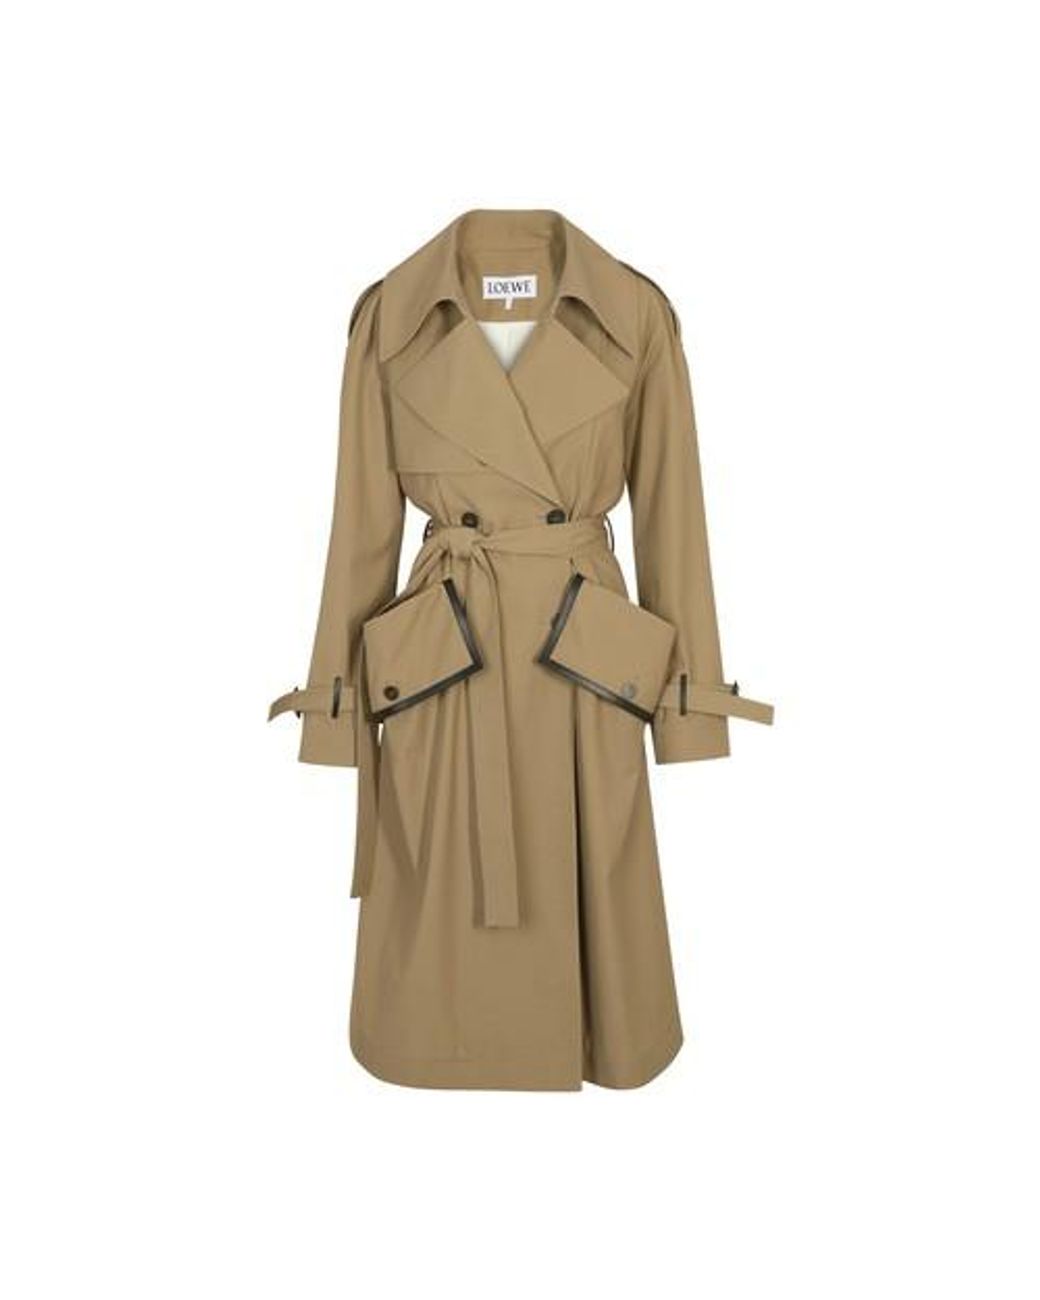 Loewe Flap Pocket Trench Coat in Camel (Natural) - Lyst